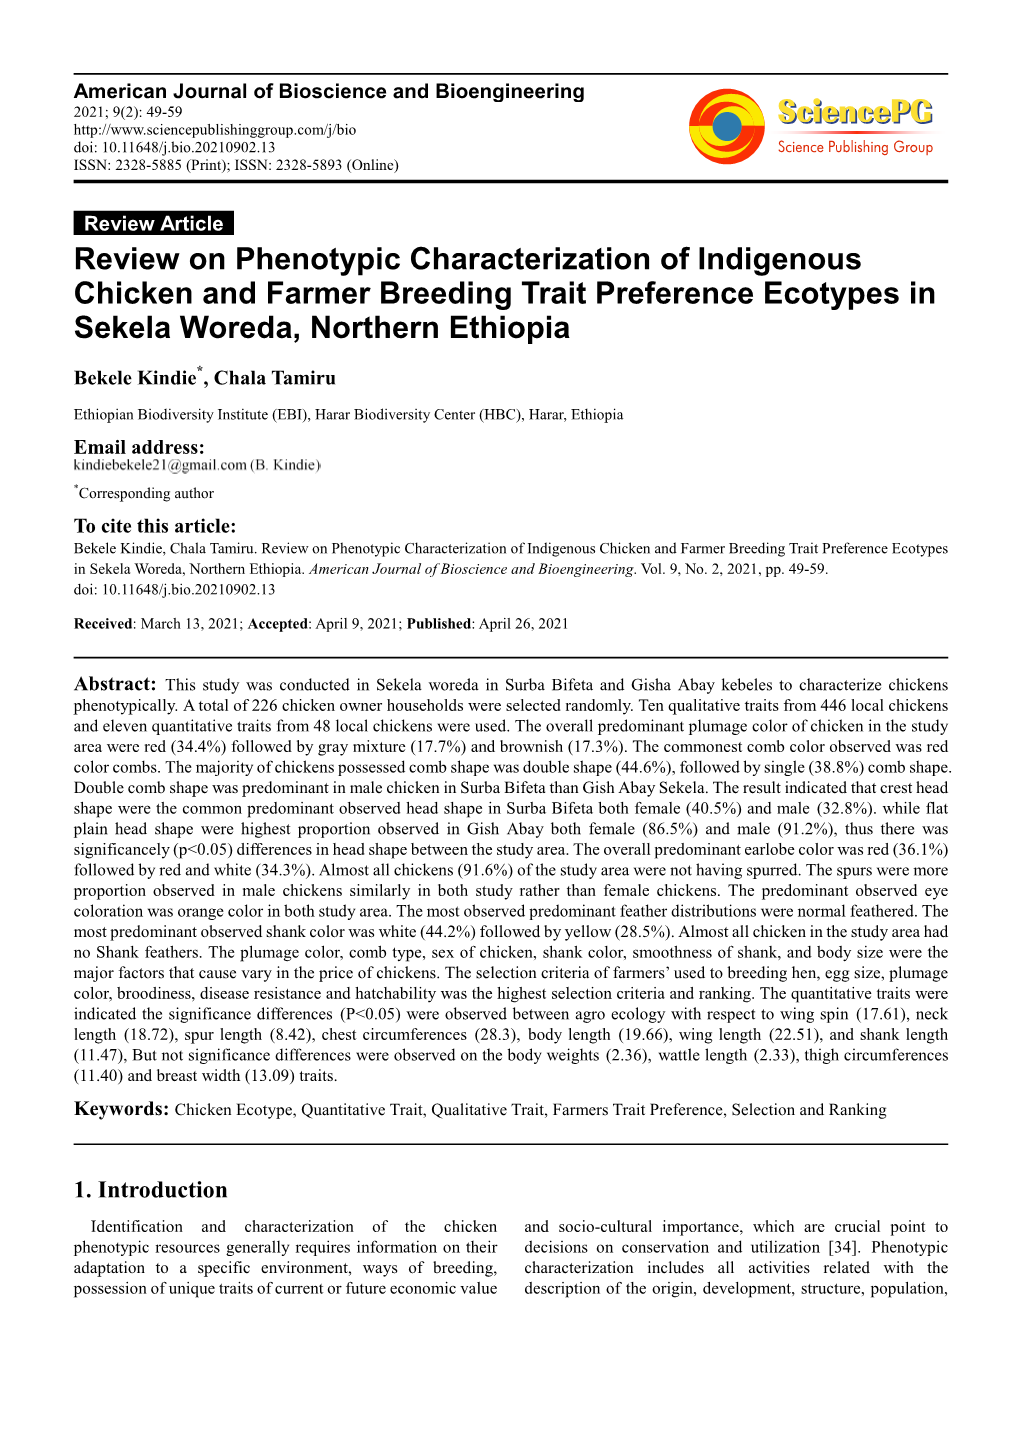 Review on Phenotypic Characterization of Indigenous Chicken and Farmer Breeding Trait Preference Ecotypes in Sekela Woreda, Northern Ethiopia